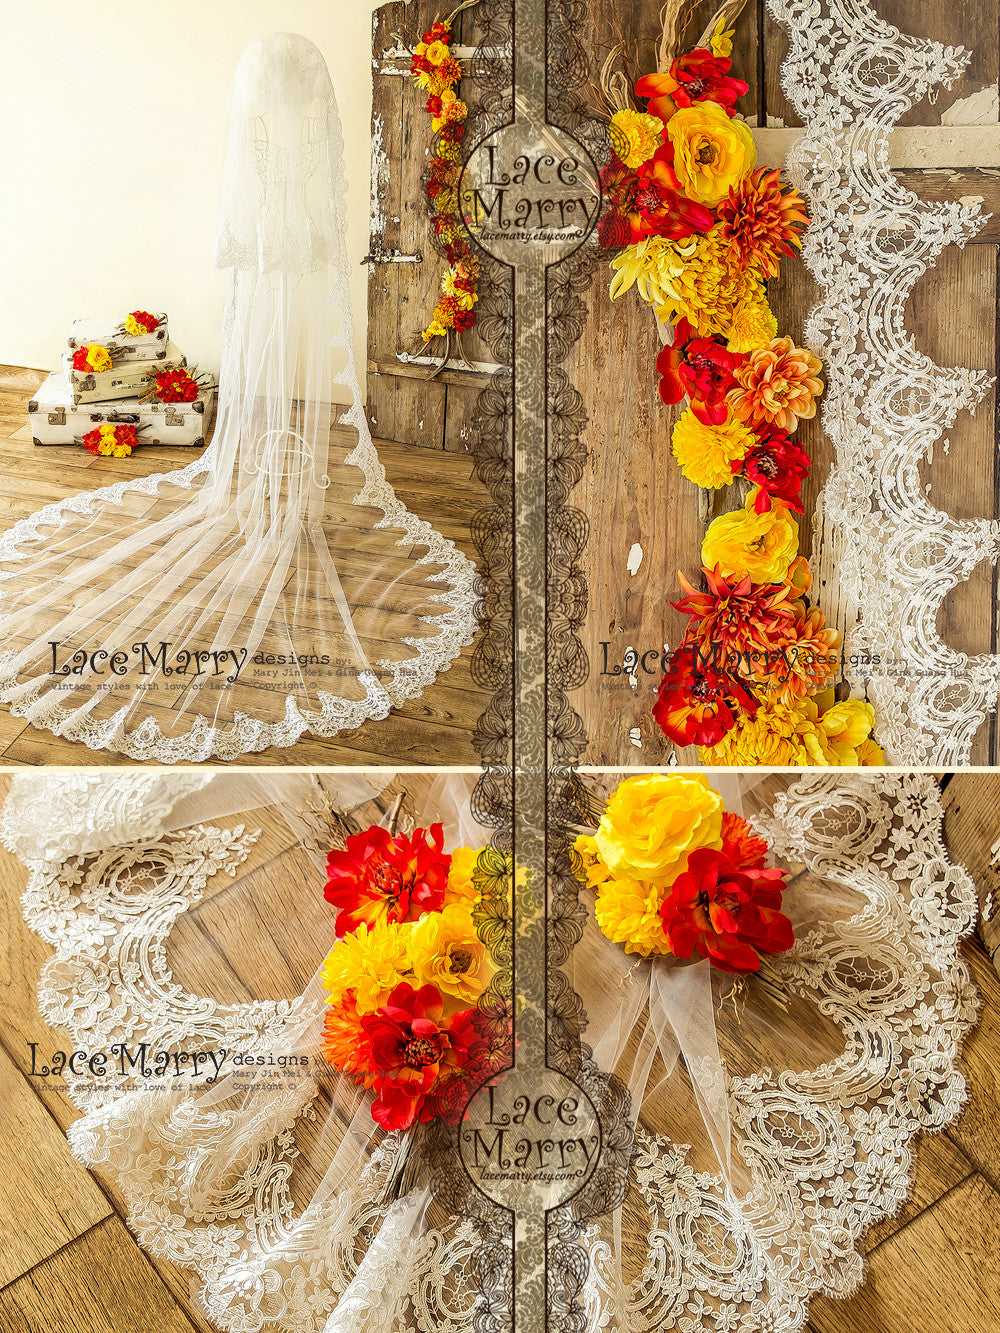 Cathedral Scalloped Allencon Lace Edged Veil